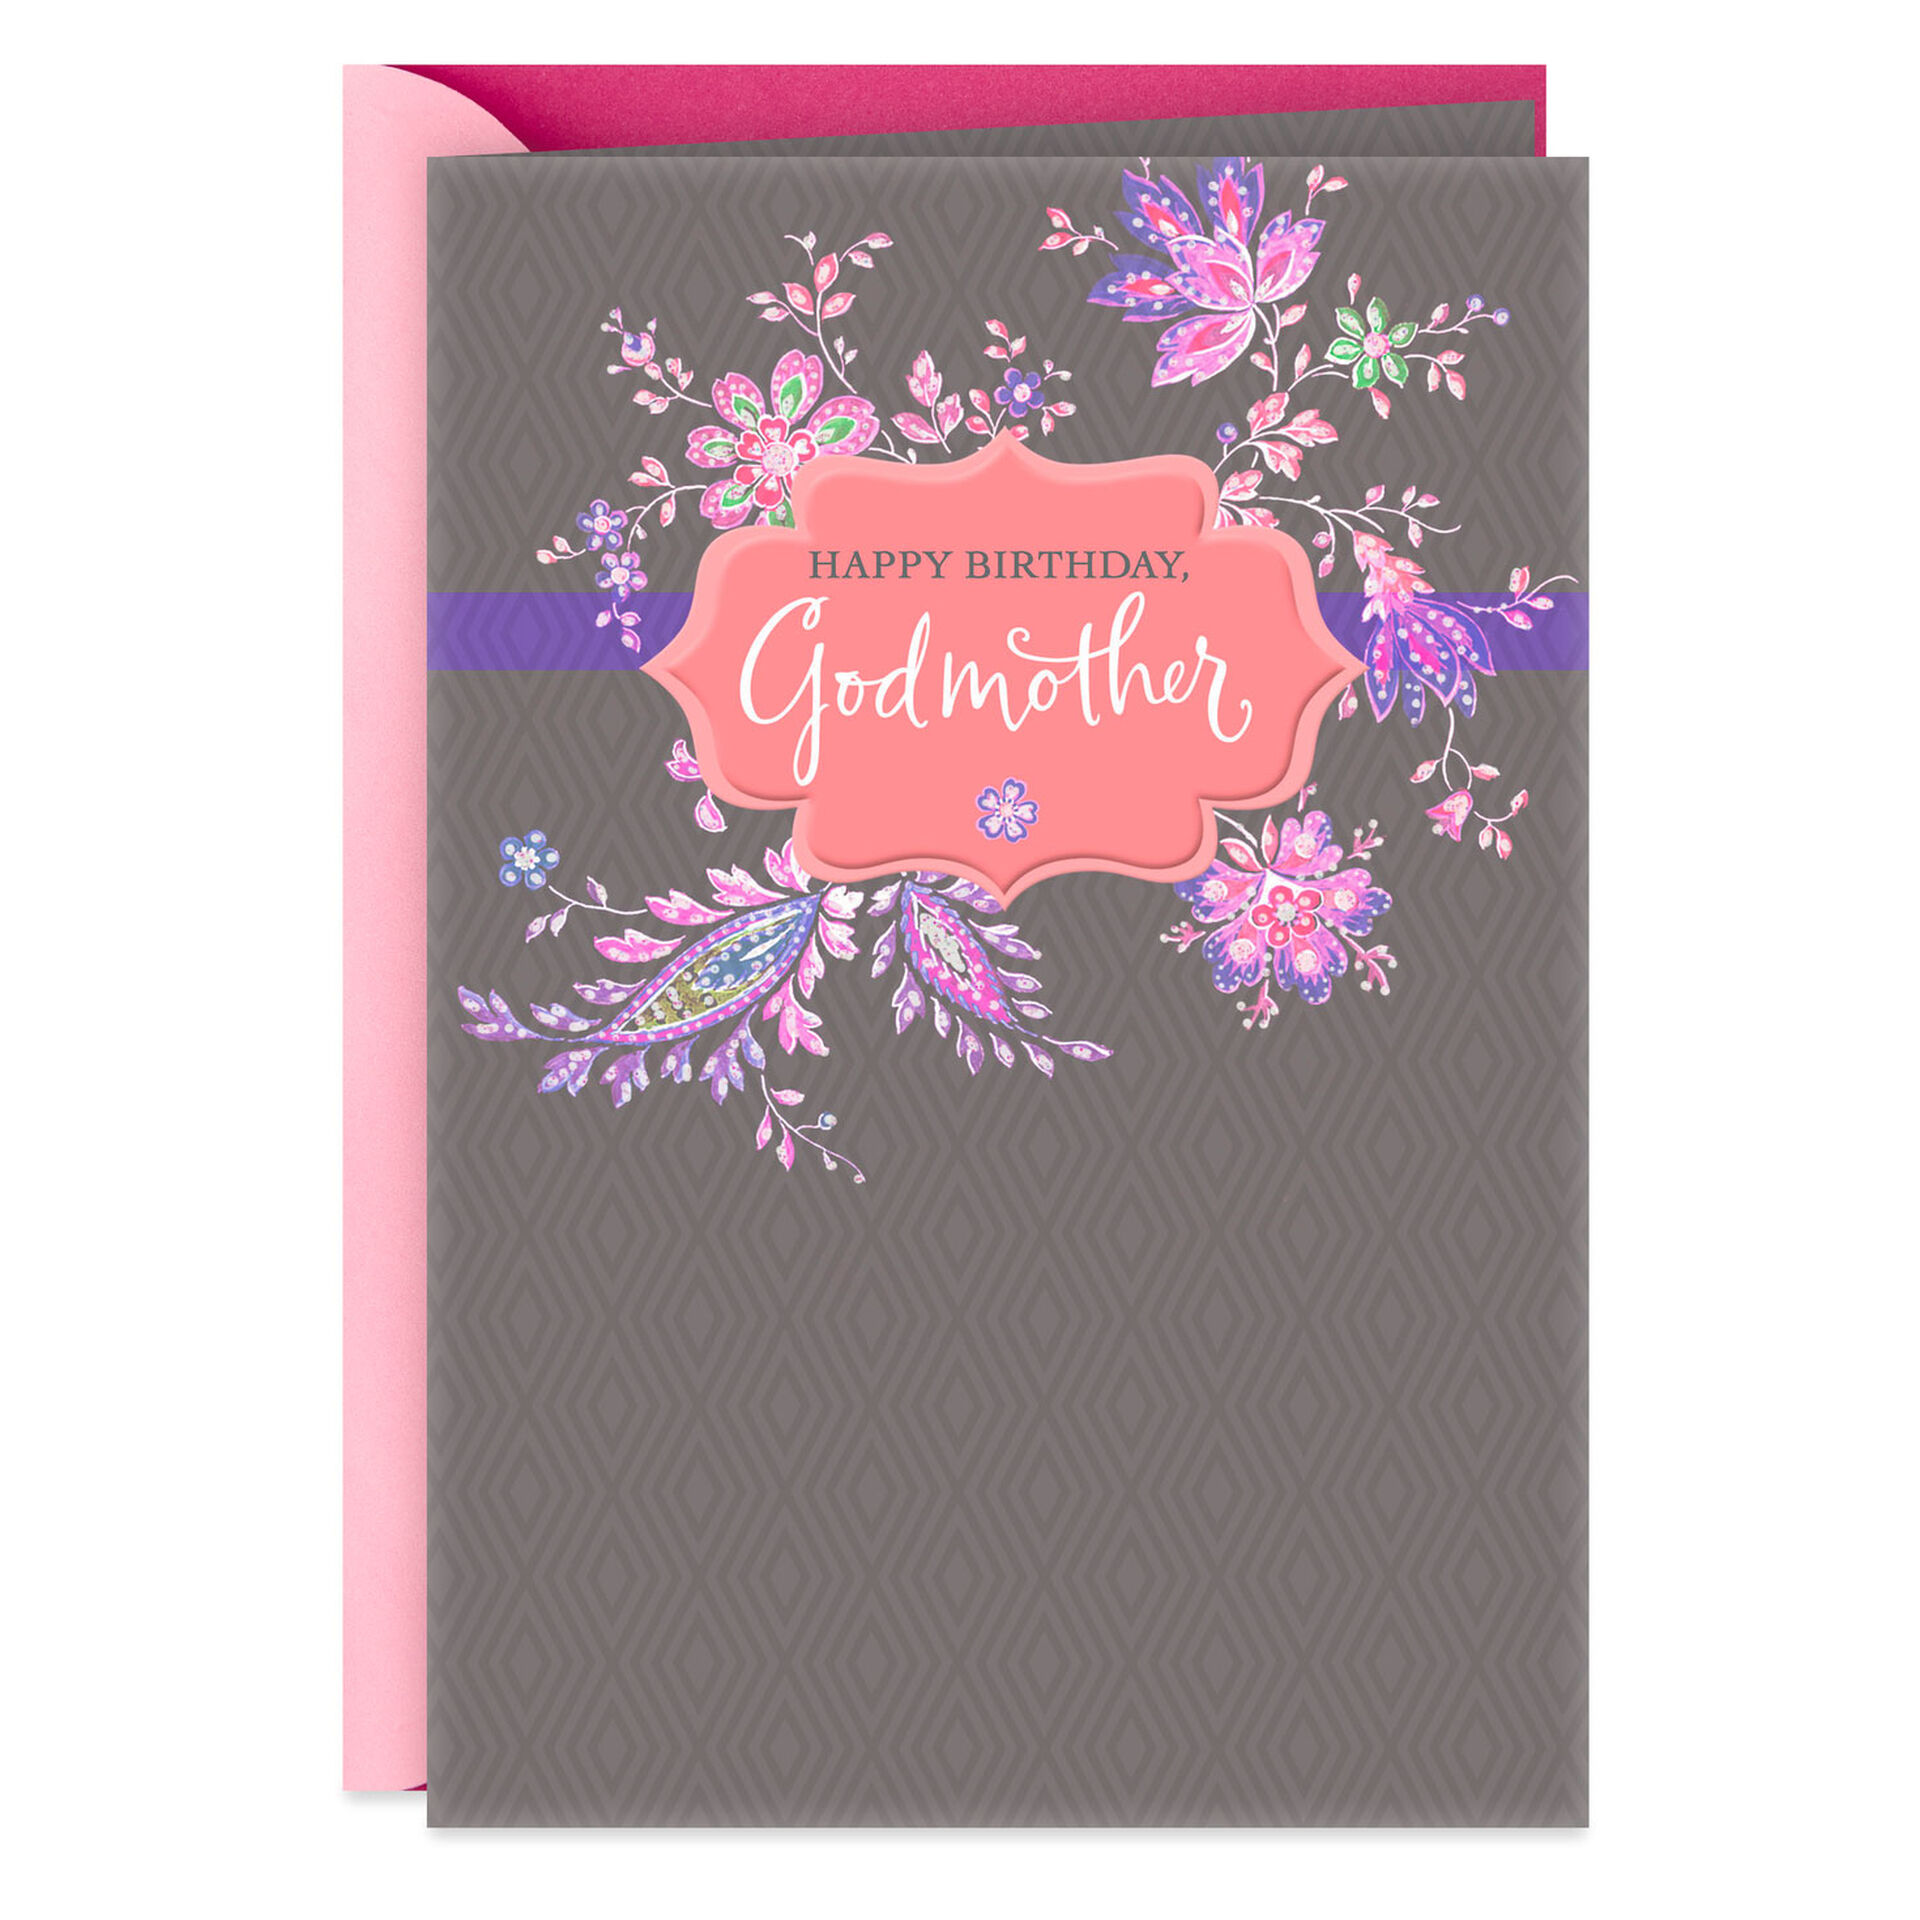 Sparkly-Flowers-Birthday-Card-for-Godmother_299FBD3995_01